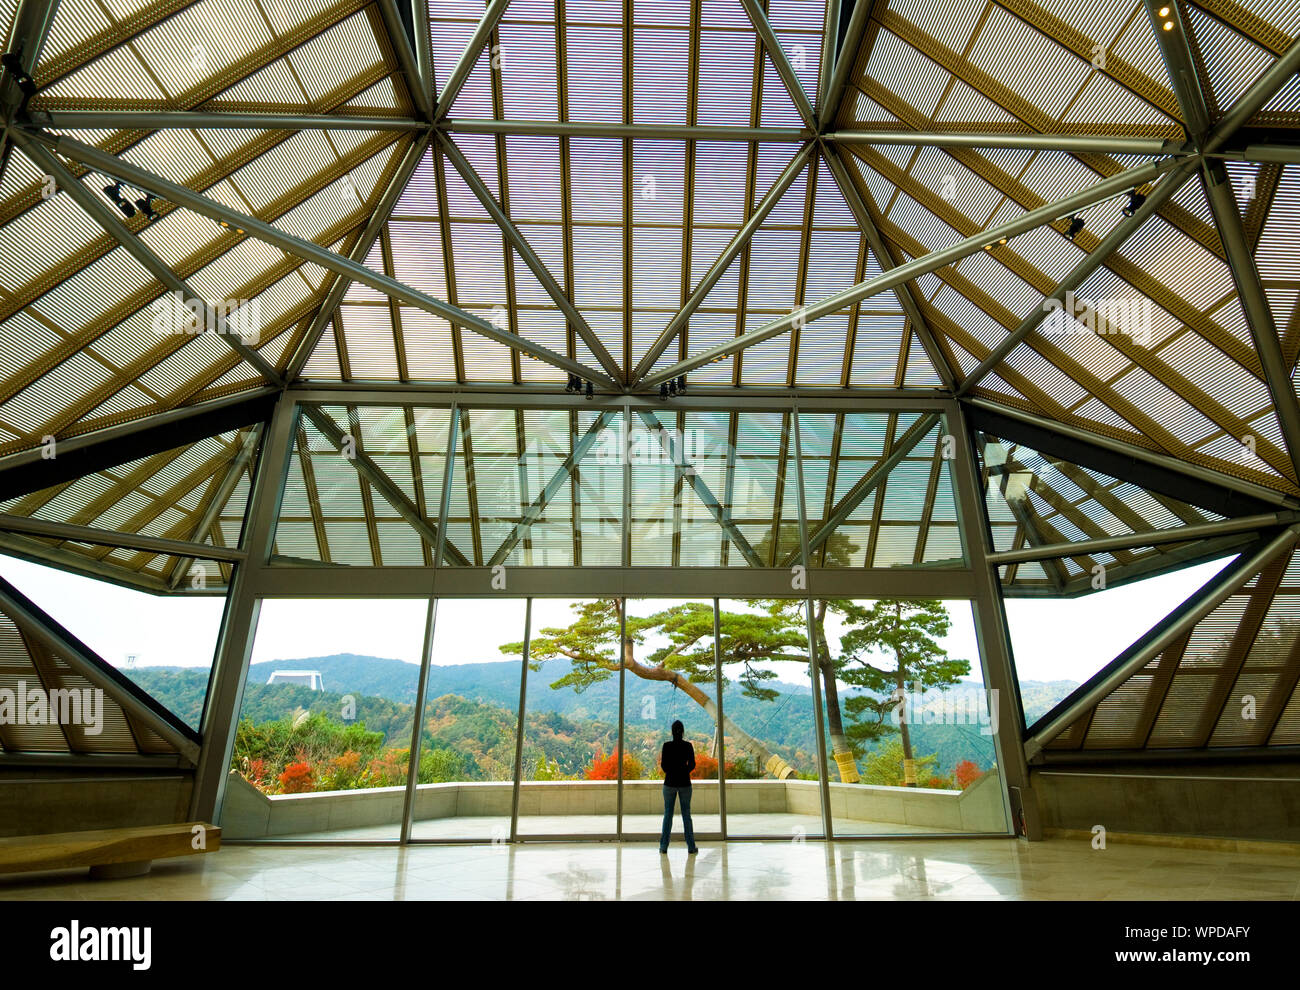 Miho Museum, You can see the similarities between this stru…